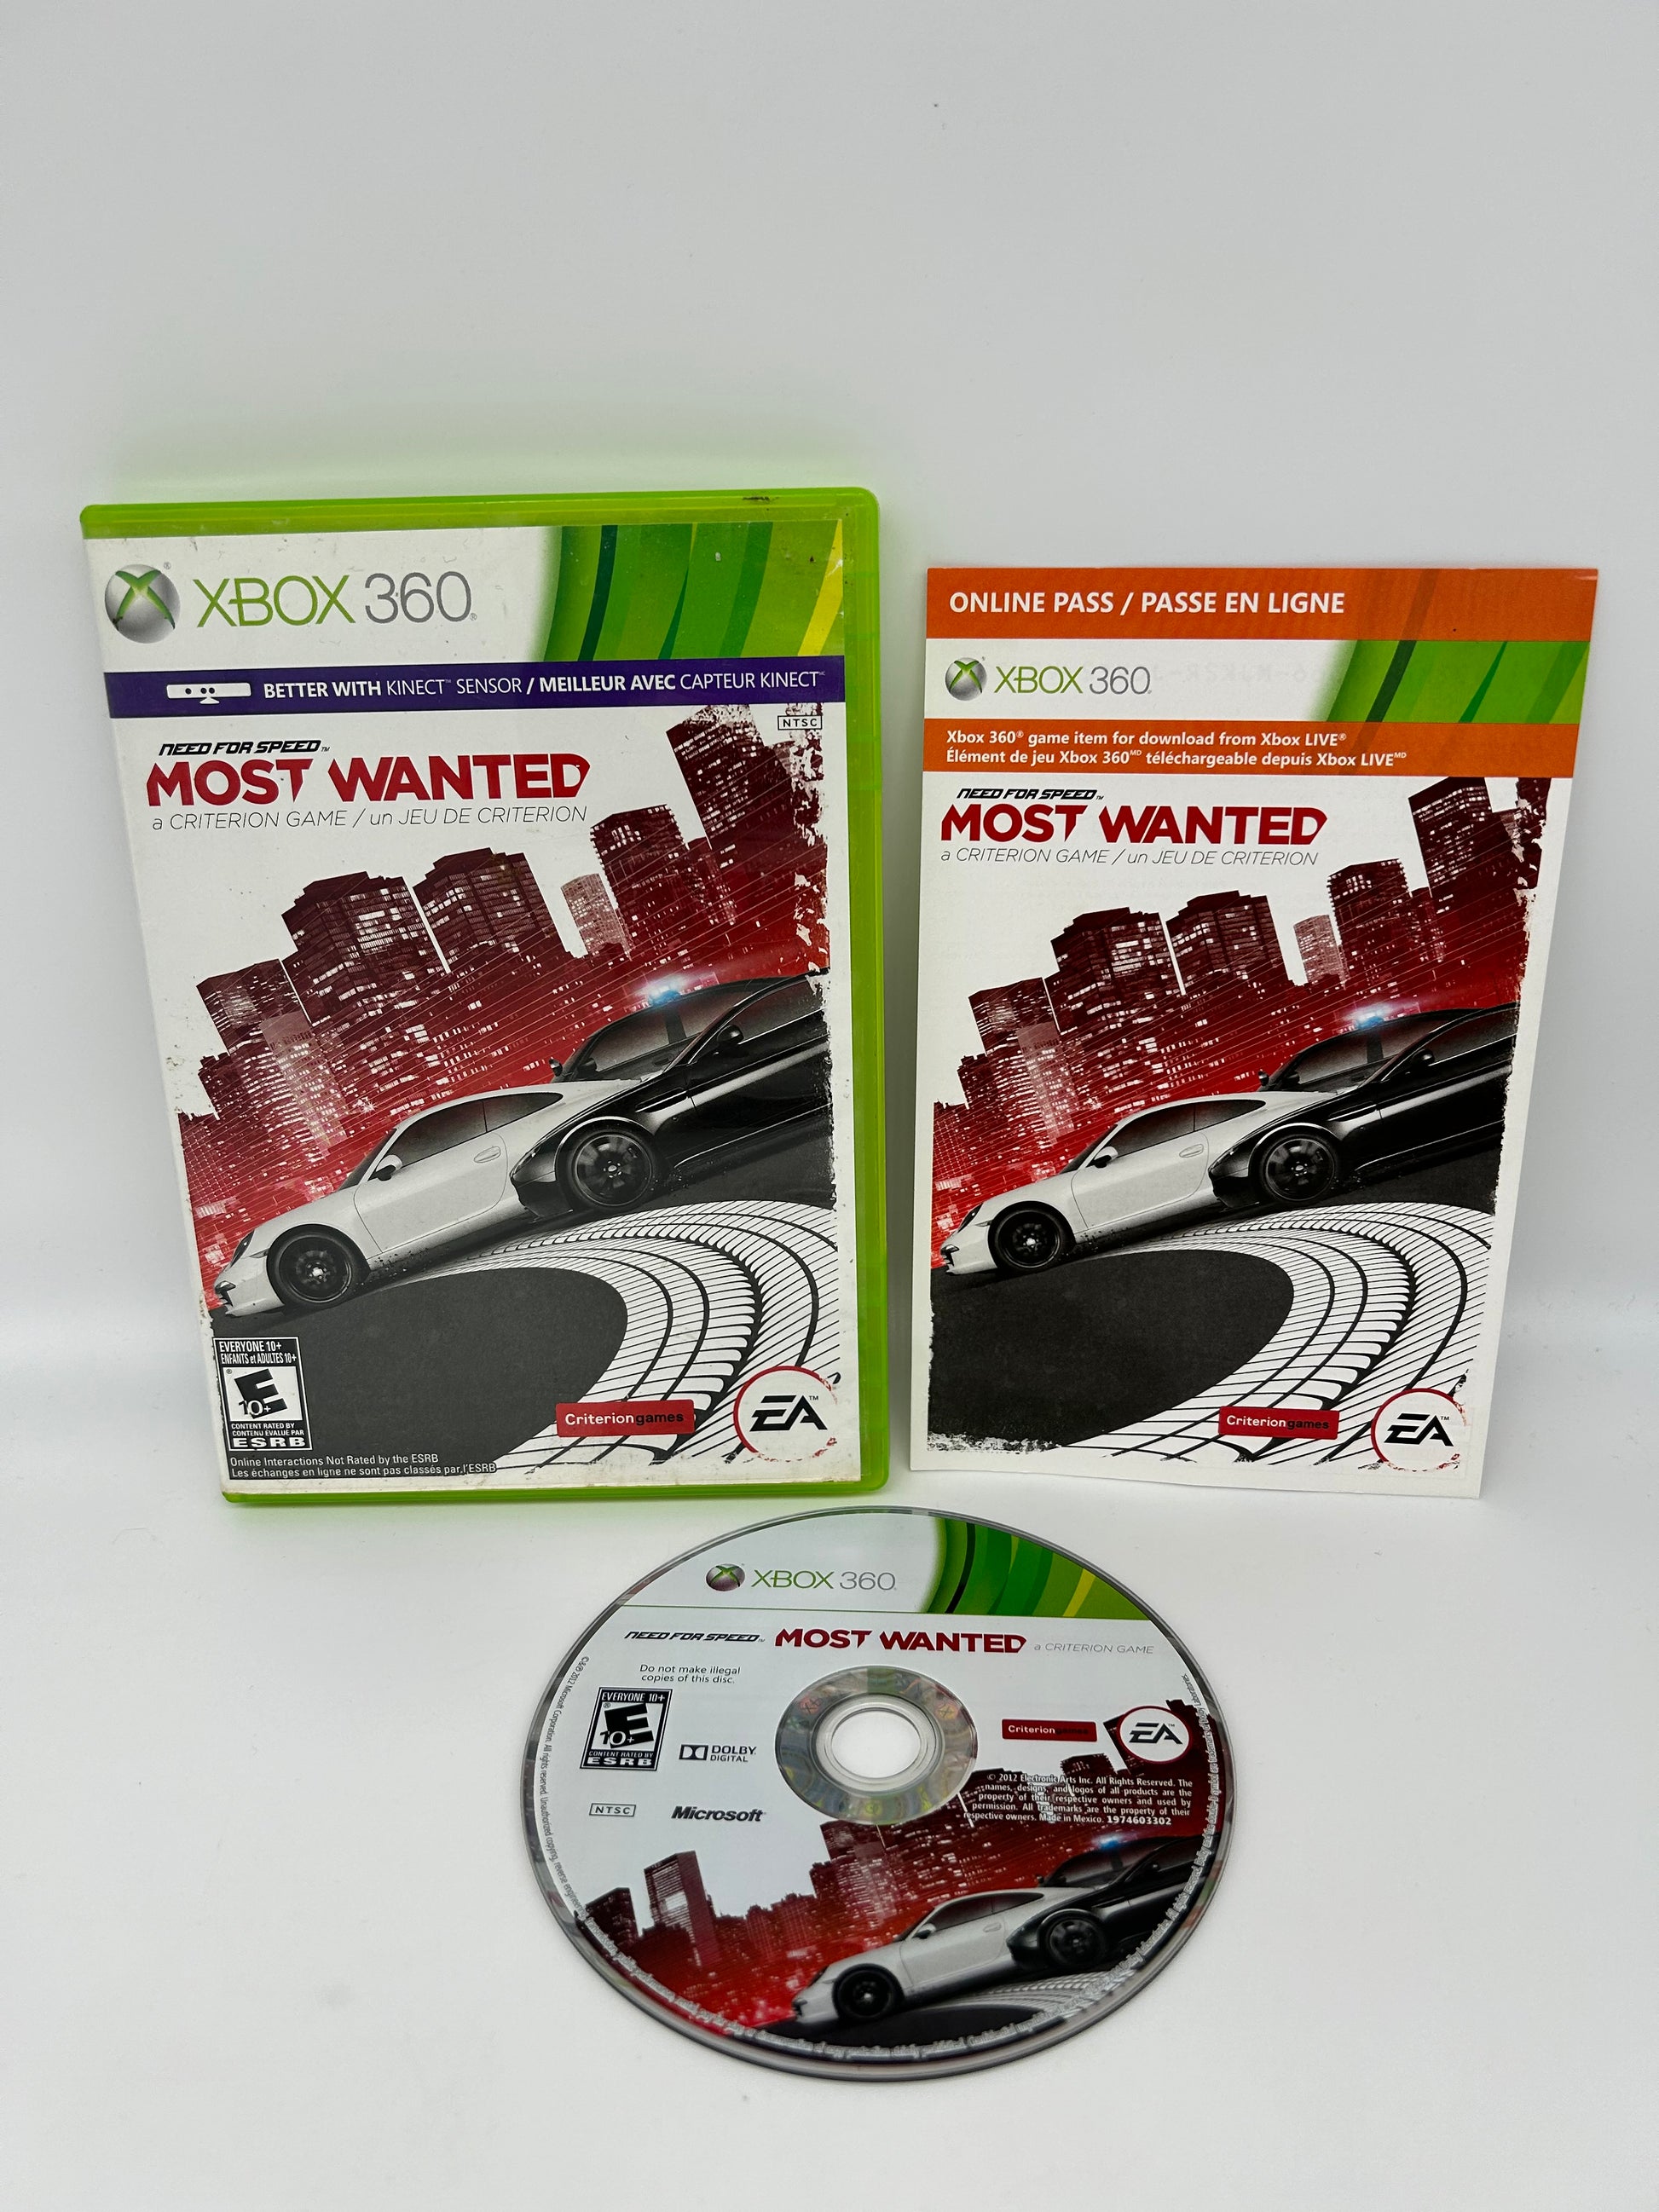 PiXEL-RETRO.COM : MICROSOFT XBOX 360 COMPLETE CIB BOX MANUAL GAME NTSC NEED FOR SPEED MOST WANTED